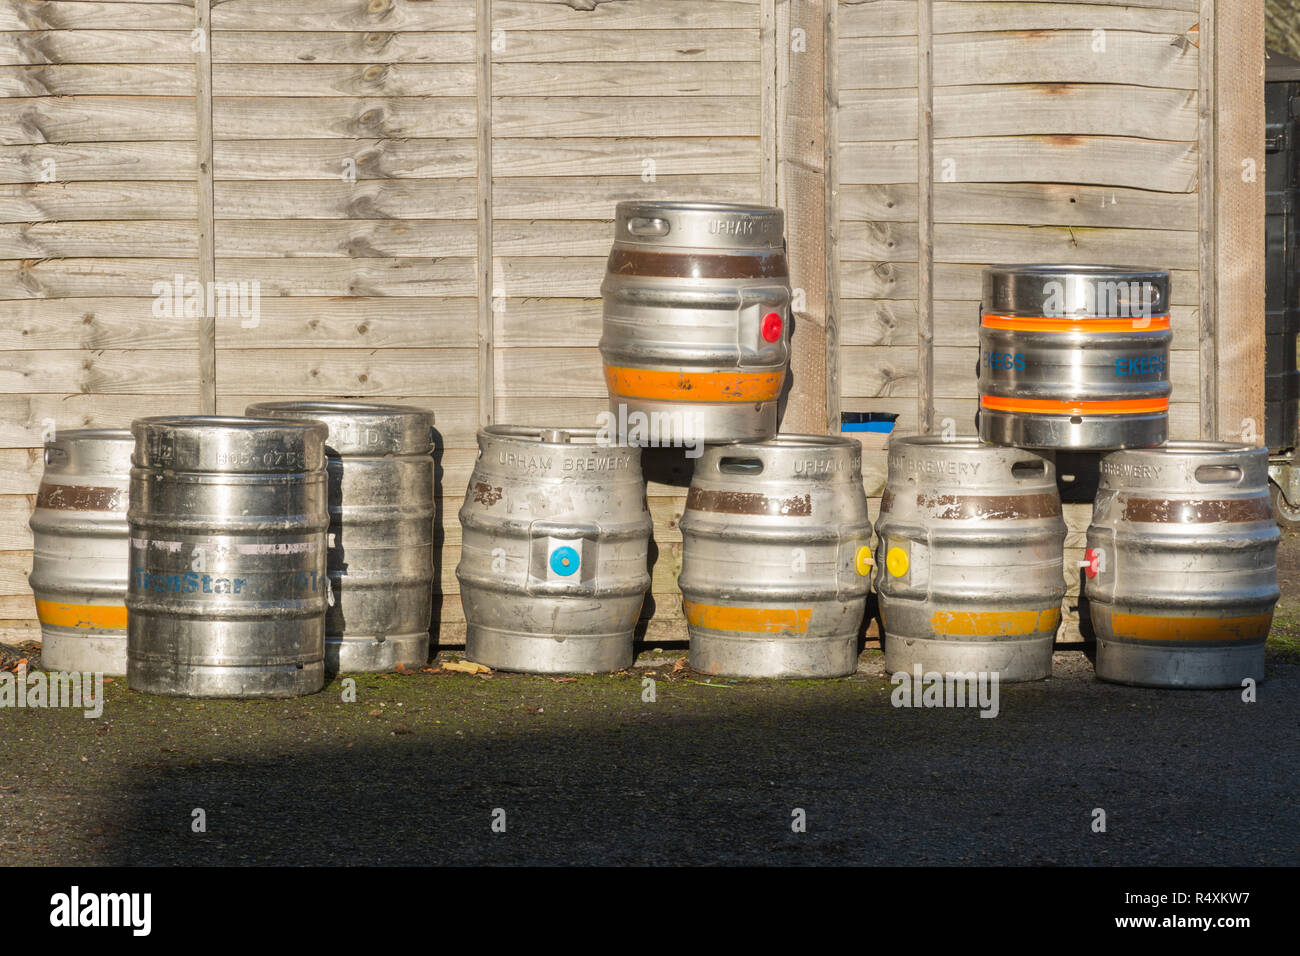 Beer barrels or kegs piled up outside a pub Stock Photo